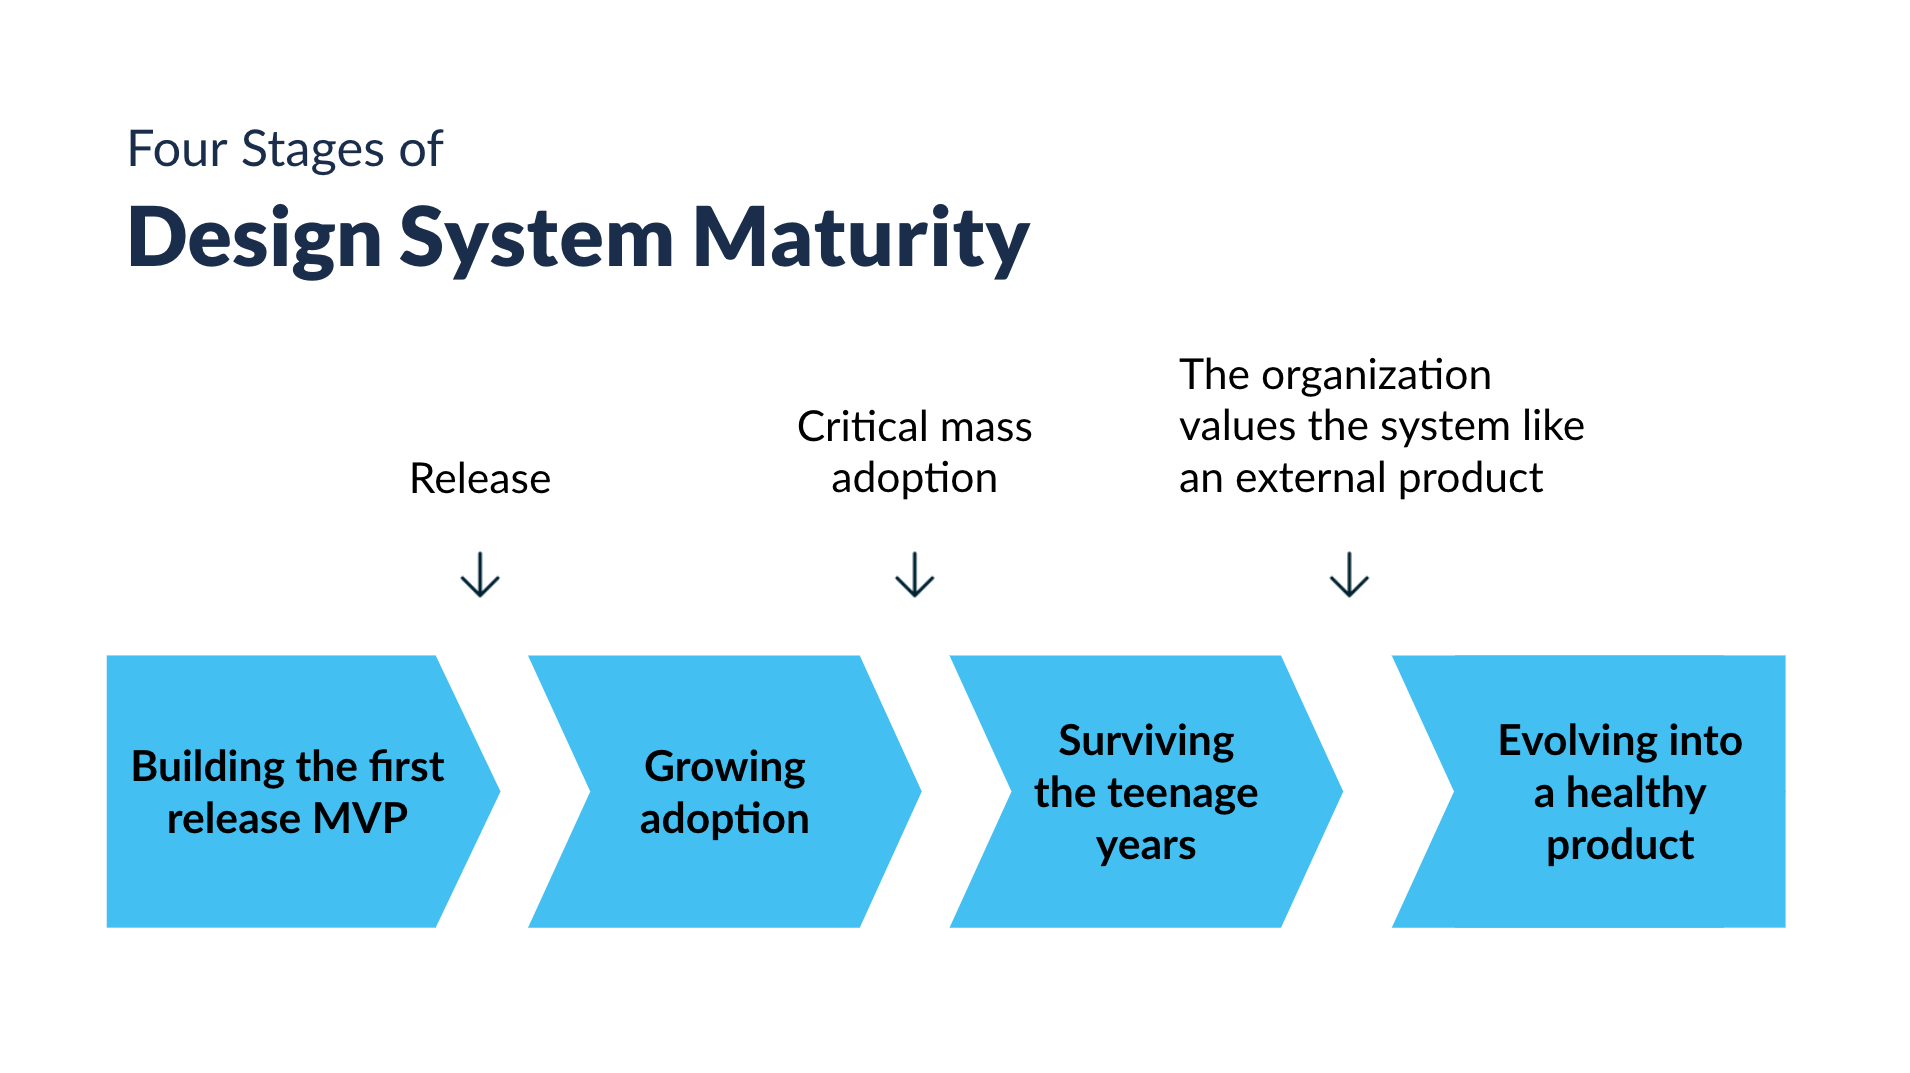 The 4 stages of design maturity: 1. Building the first release MVP 2. Growing adoption 3. Surviving the teenage years 4. Evolving into a healthy products The release of the product happens between step 1 and 2, while critical mass adoption occurs between 2 and 3, and finally the organization valuing the system like an external product occurs between steps 3 and 4.